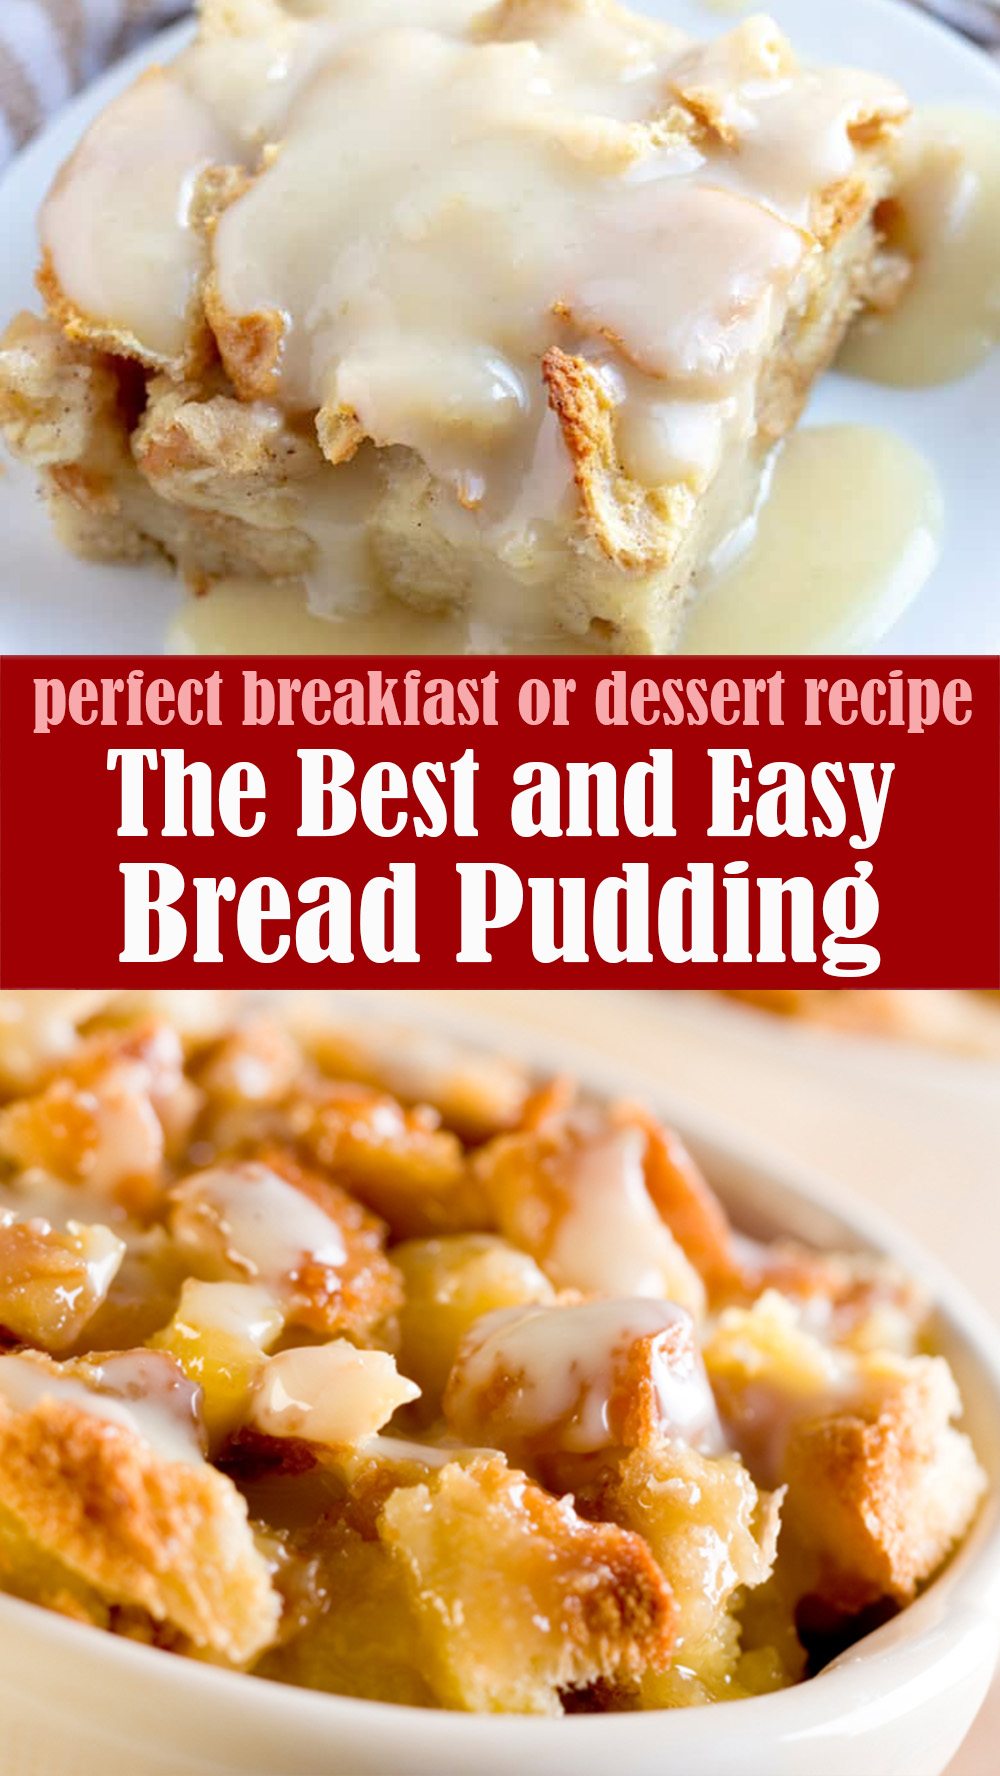 The Best and Easy Bread Pudding